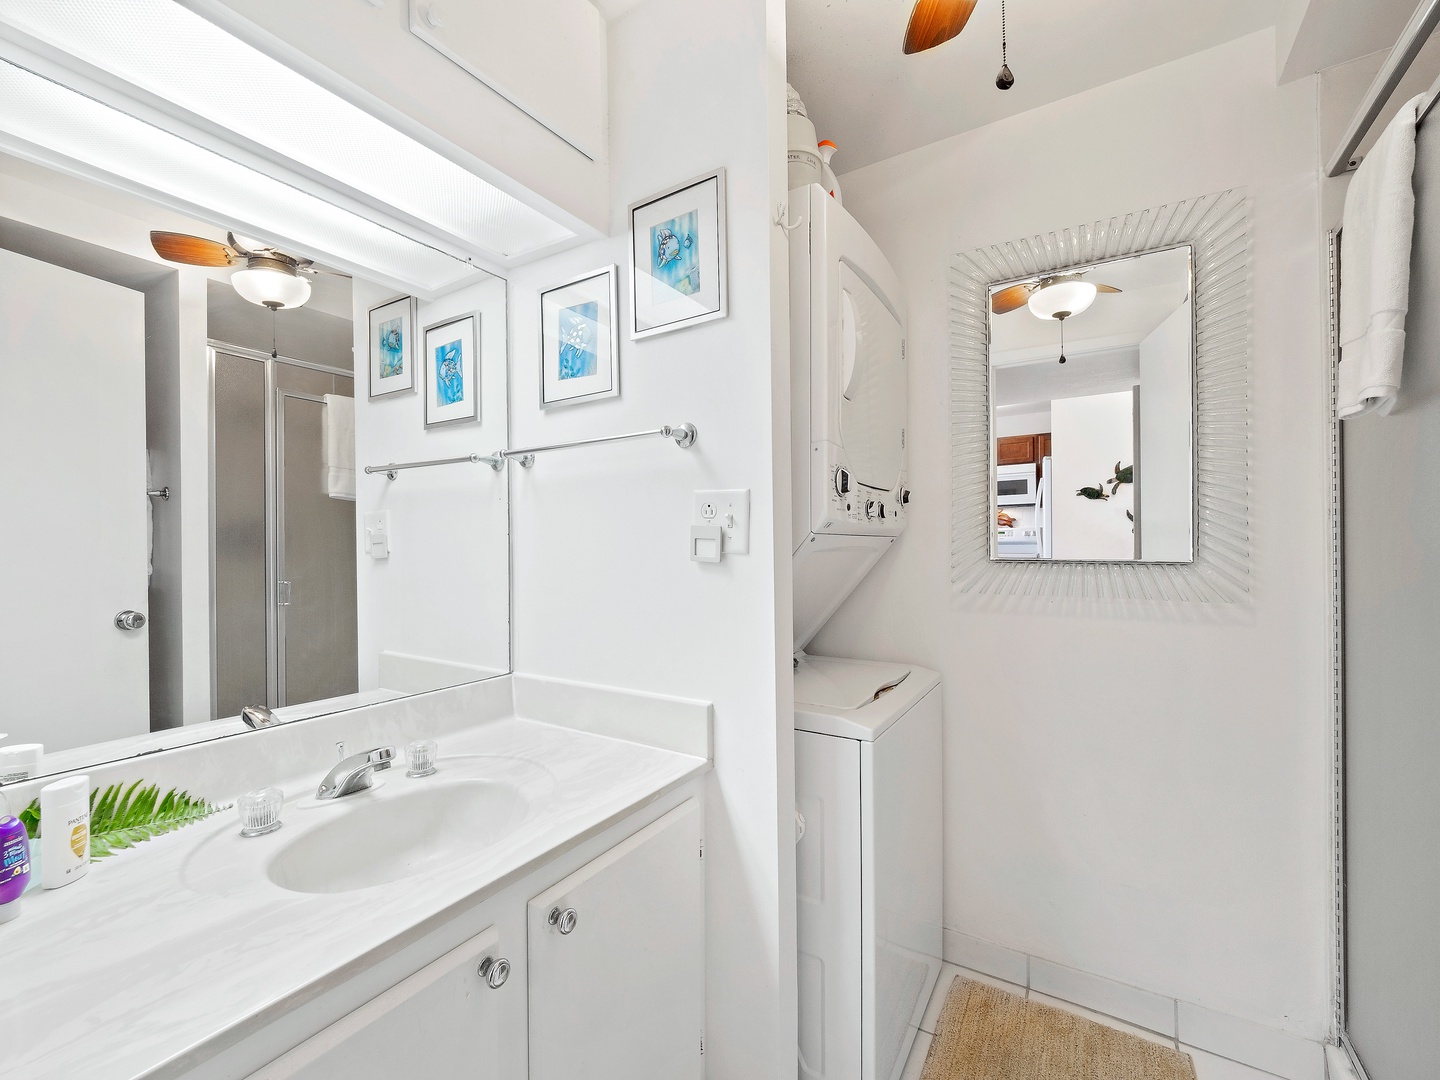 Shared bathroom with stand up shower, and stacked washer and dryer